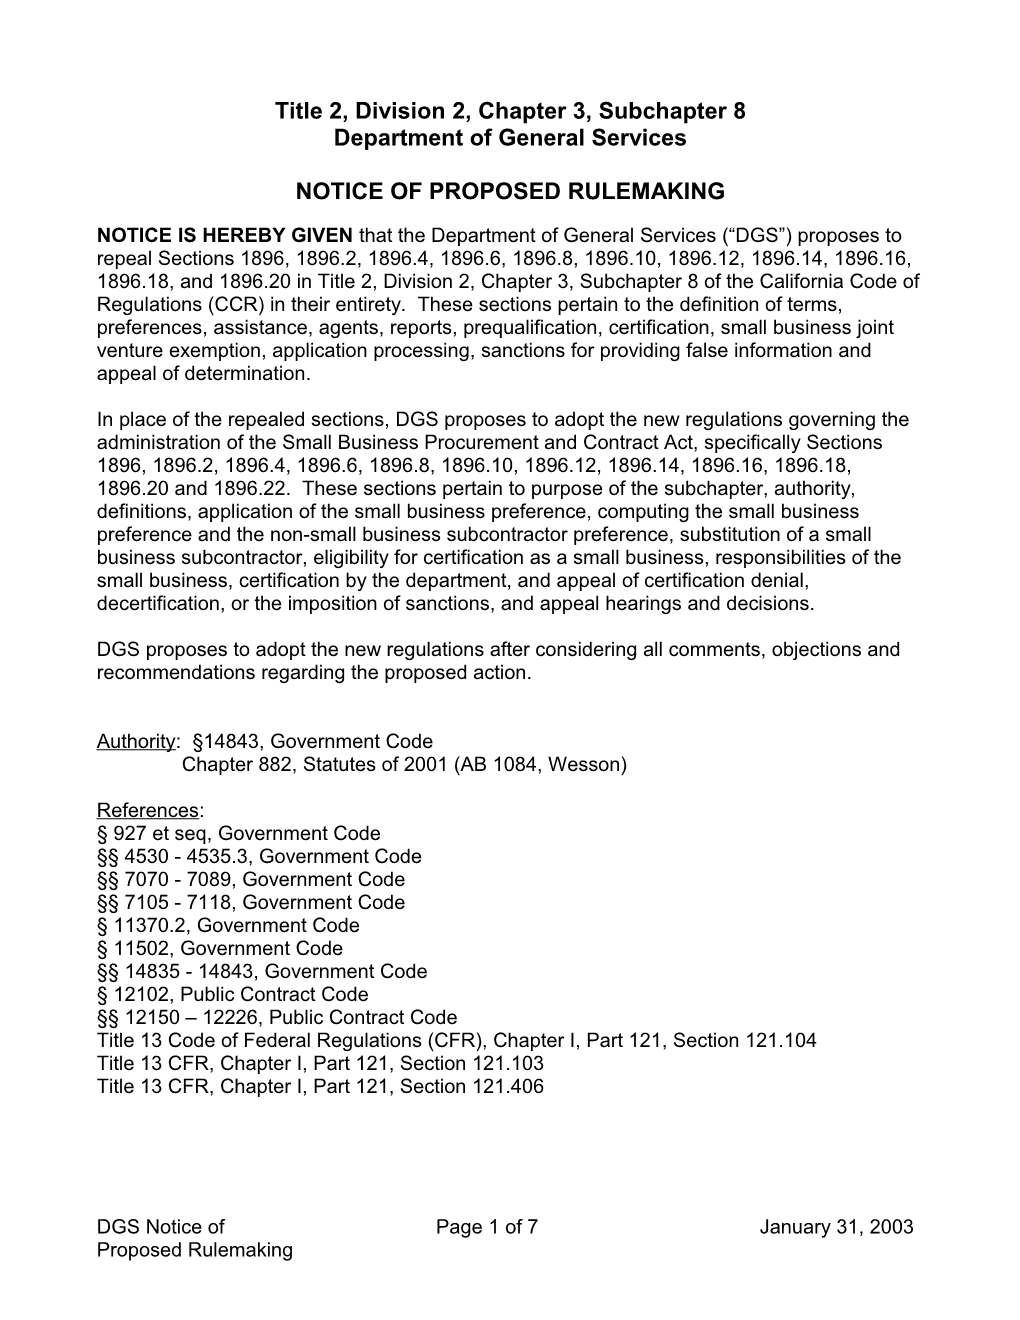 Notice of Rulemaking